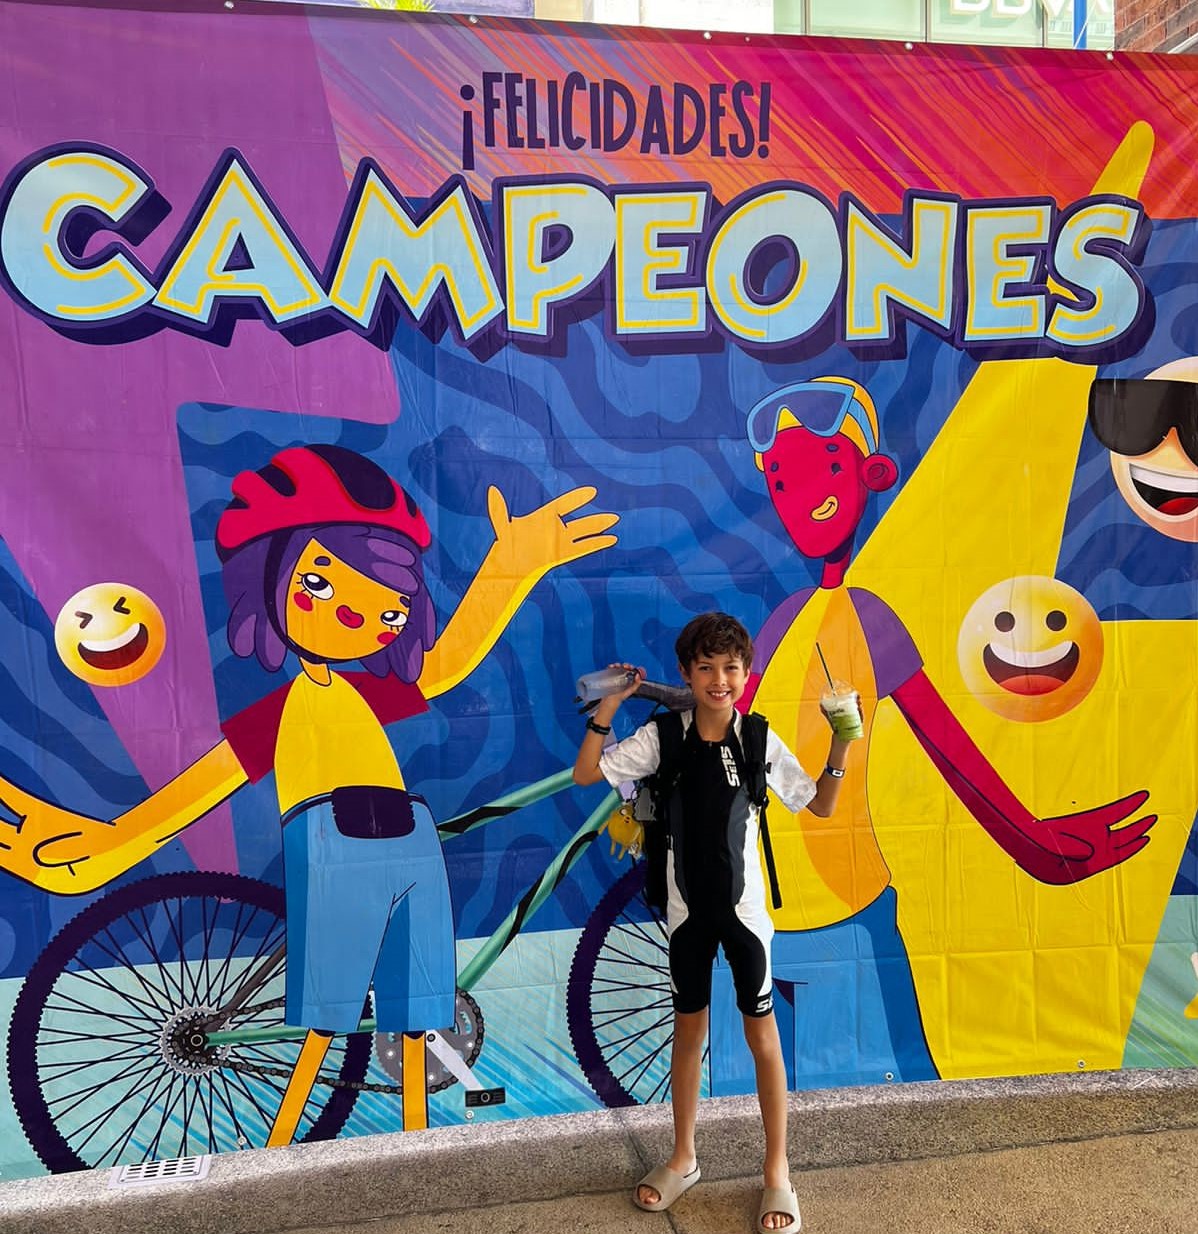 Mateo poses after his triathlon in front of a congratulations banner